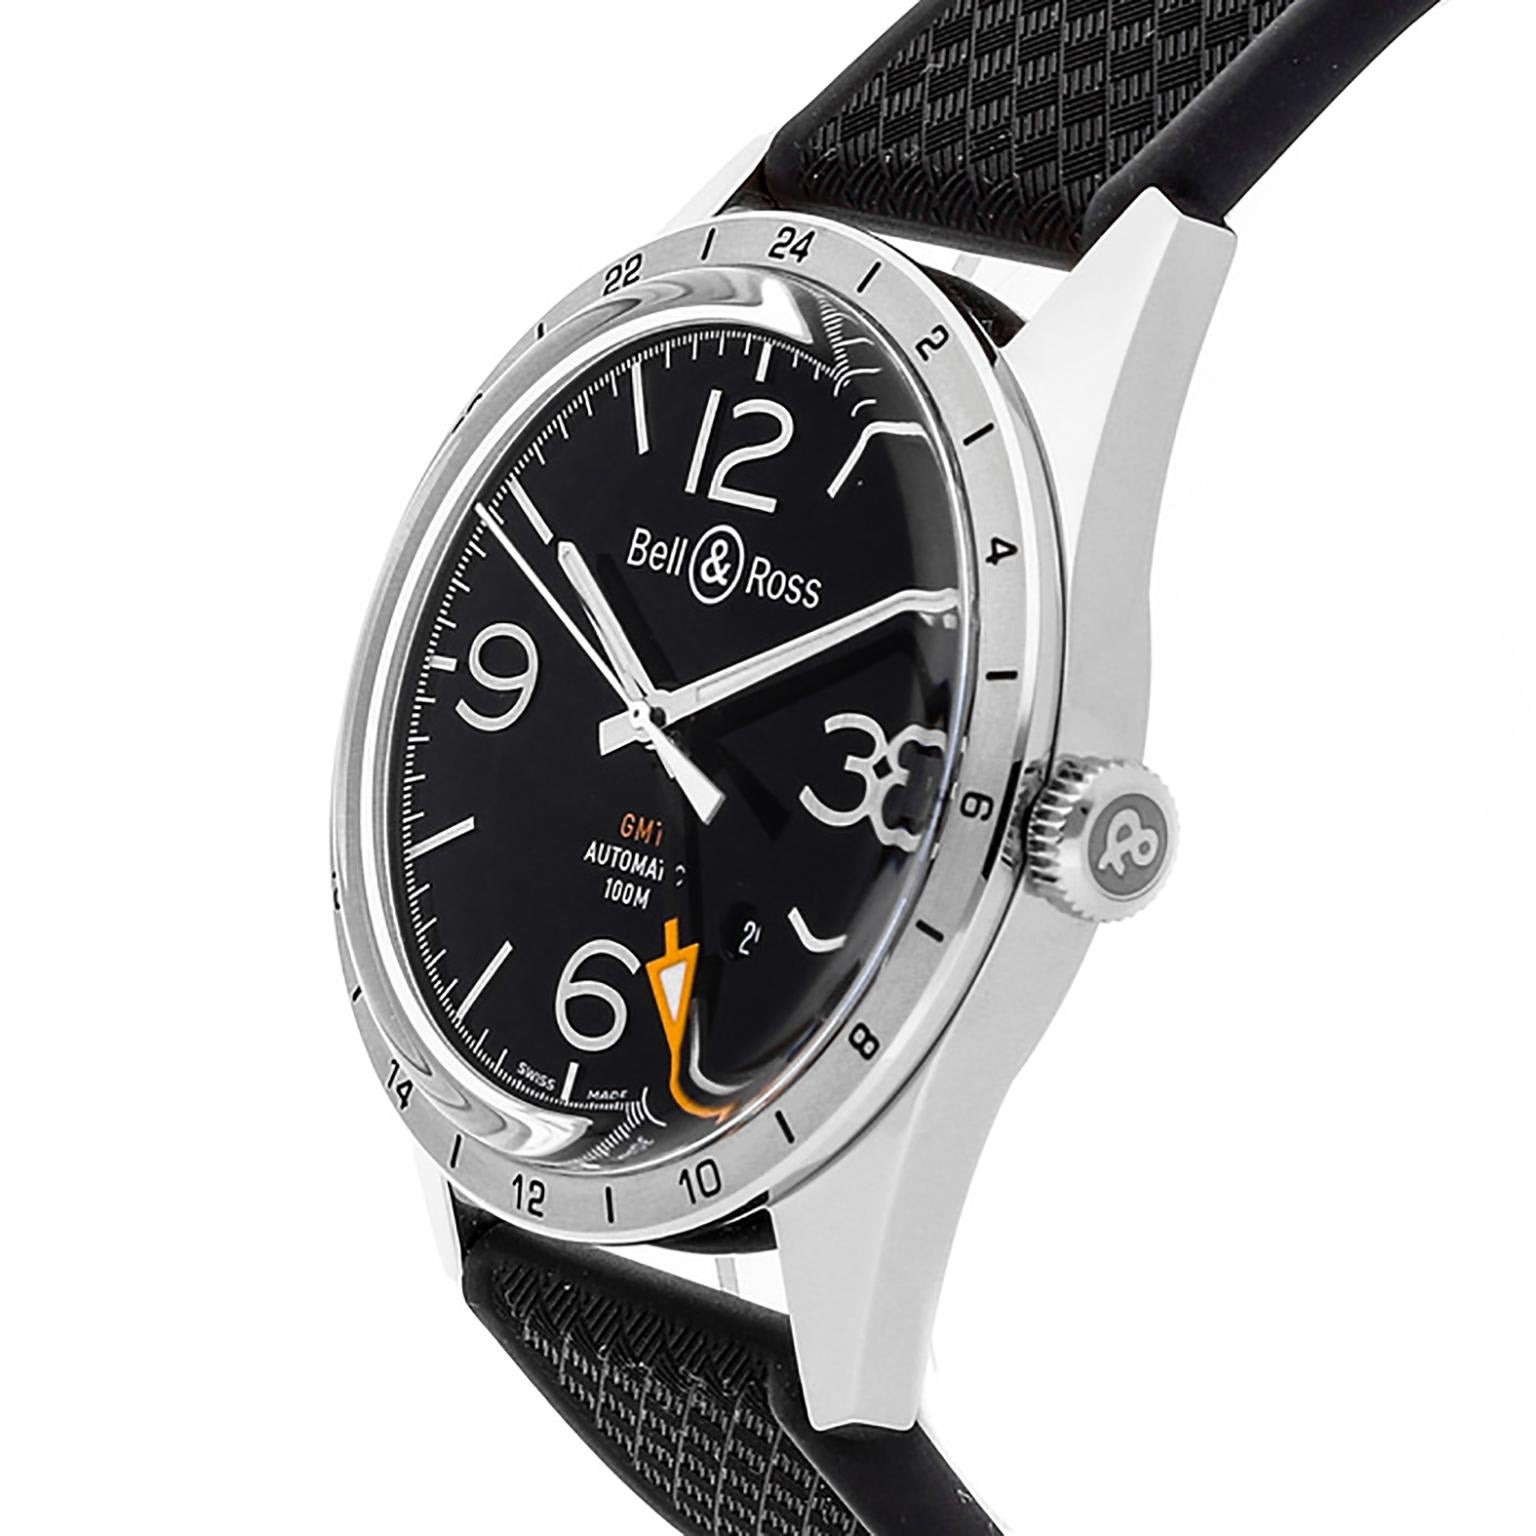 Bell & Ross BR123-GMT stainless steel case with a black rubber strap and stainless steel buckle. Black dial with white hands and white index -  Arabic numerals hour markers. Movement: Automatic. Dial Type: Analog. Date display between 4 o'clock and